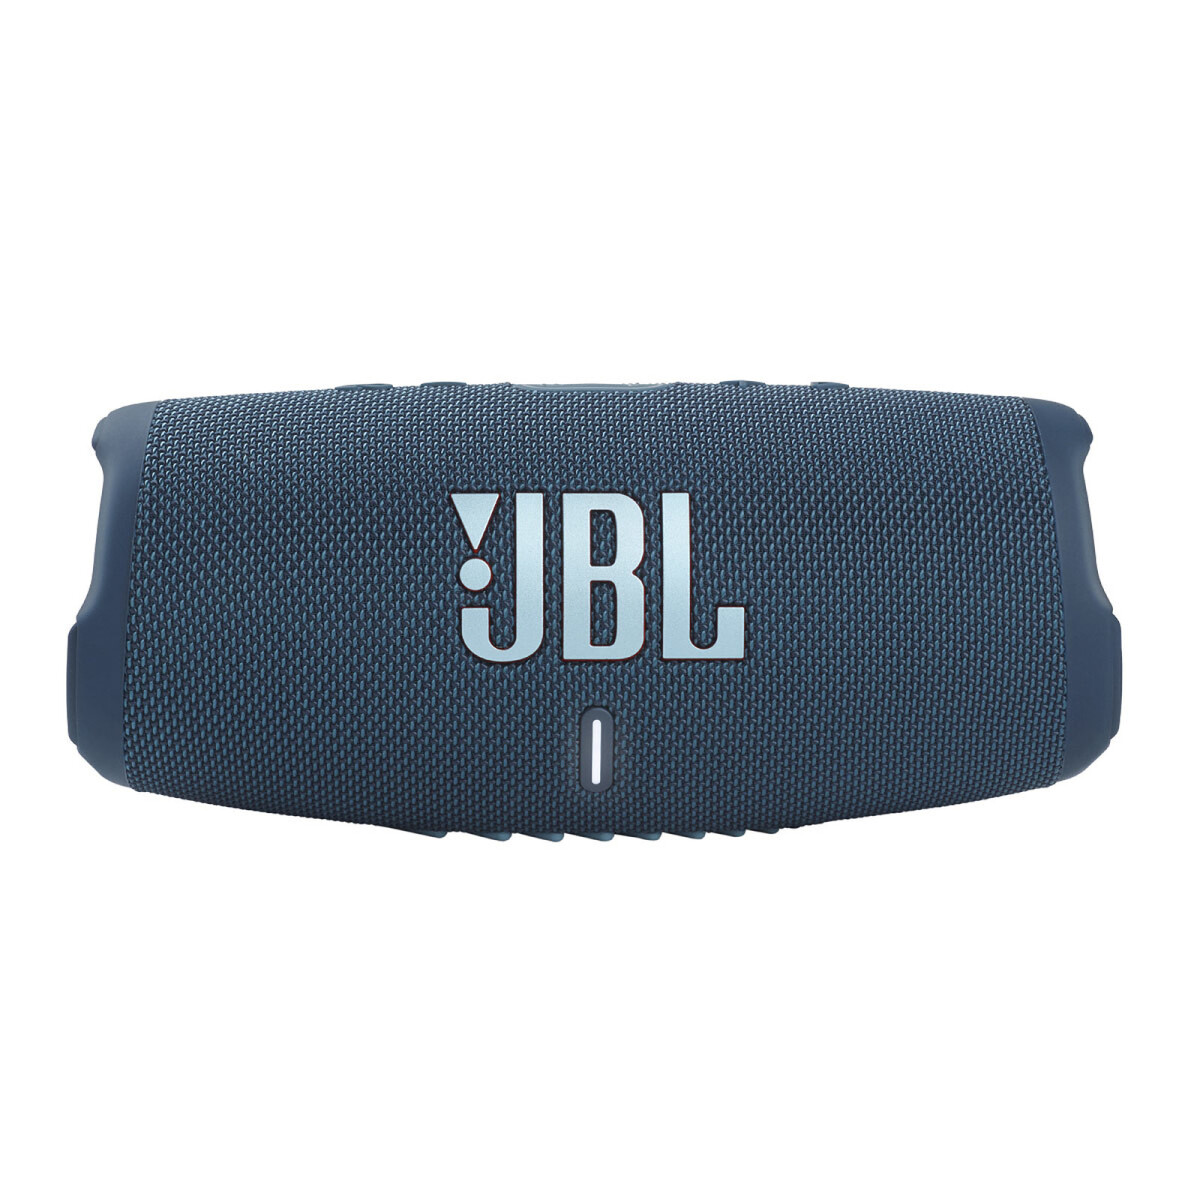 JBL CHARGE 5 PARLANTE BLUETOOTH - Azul 